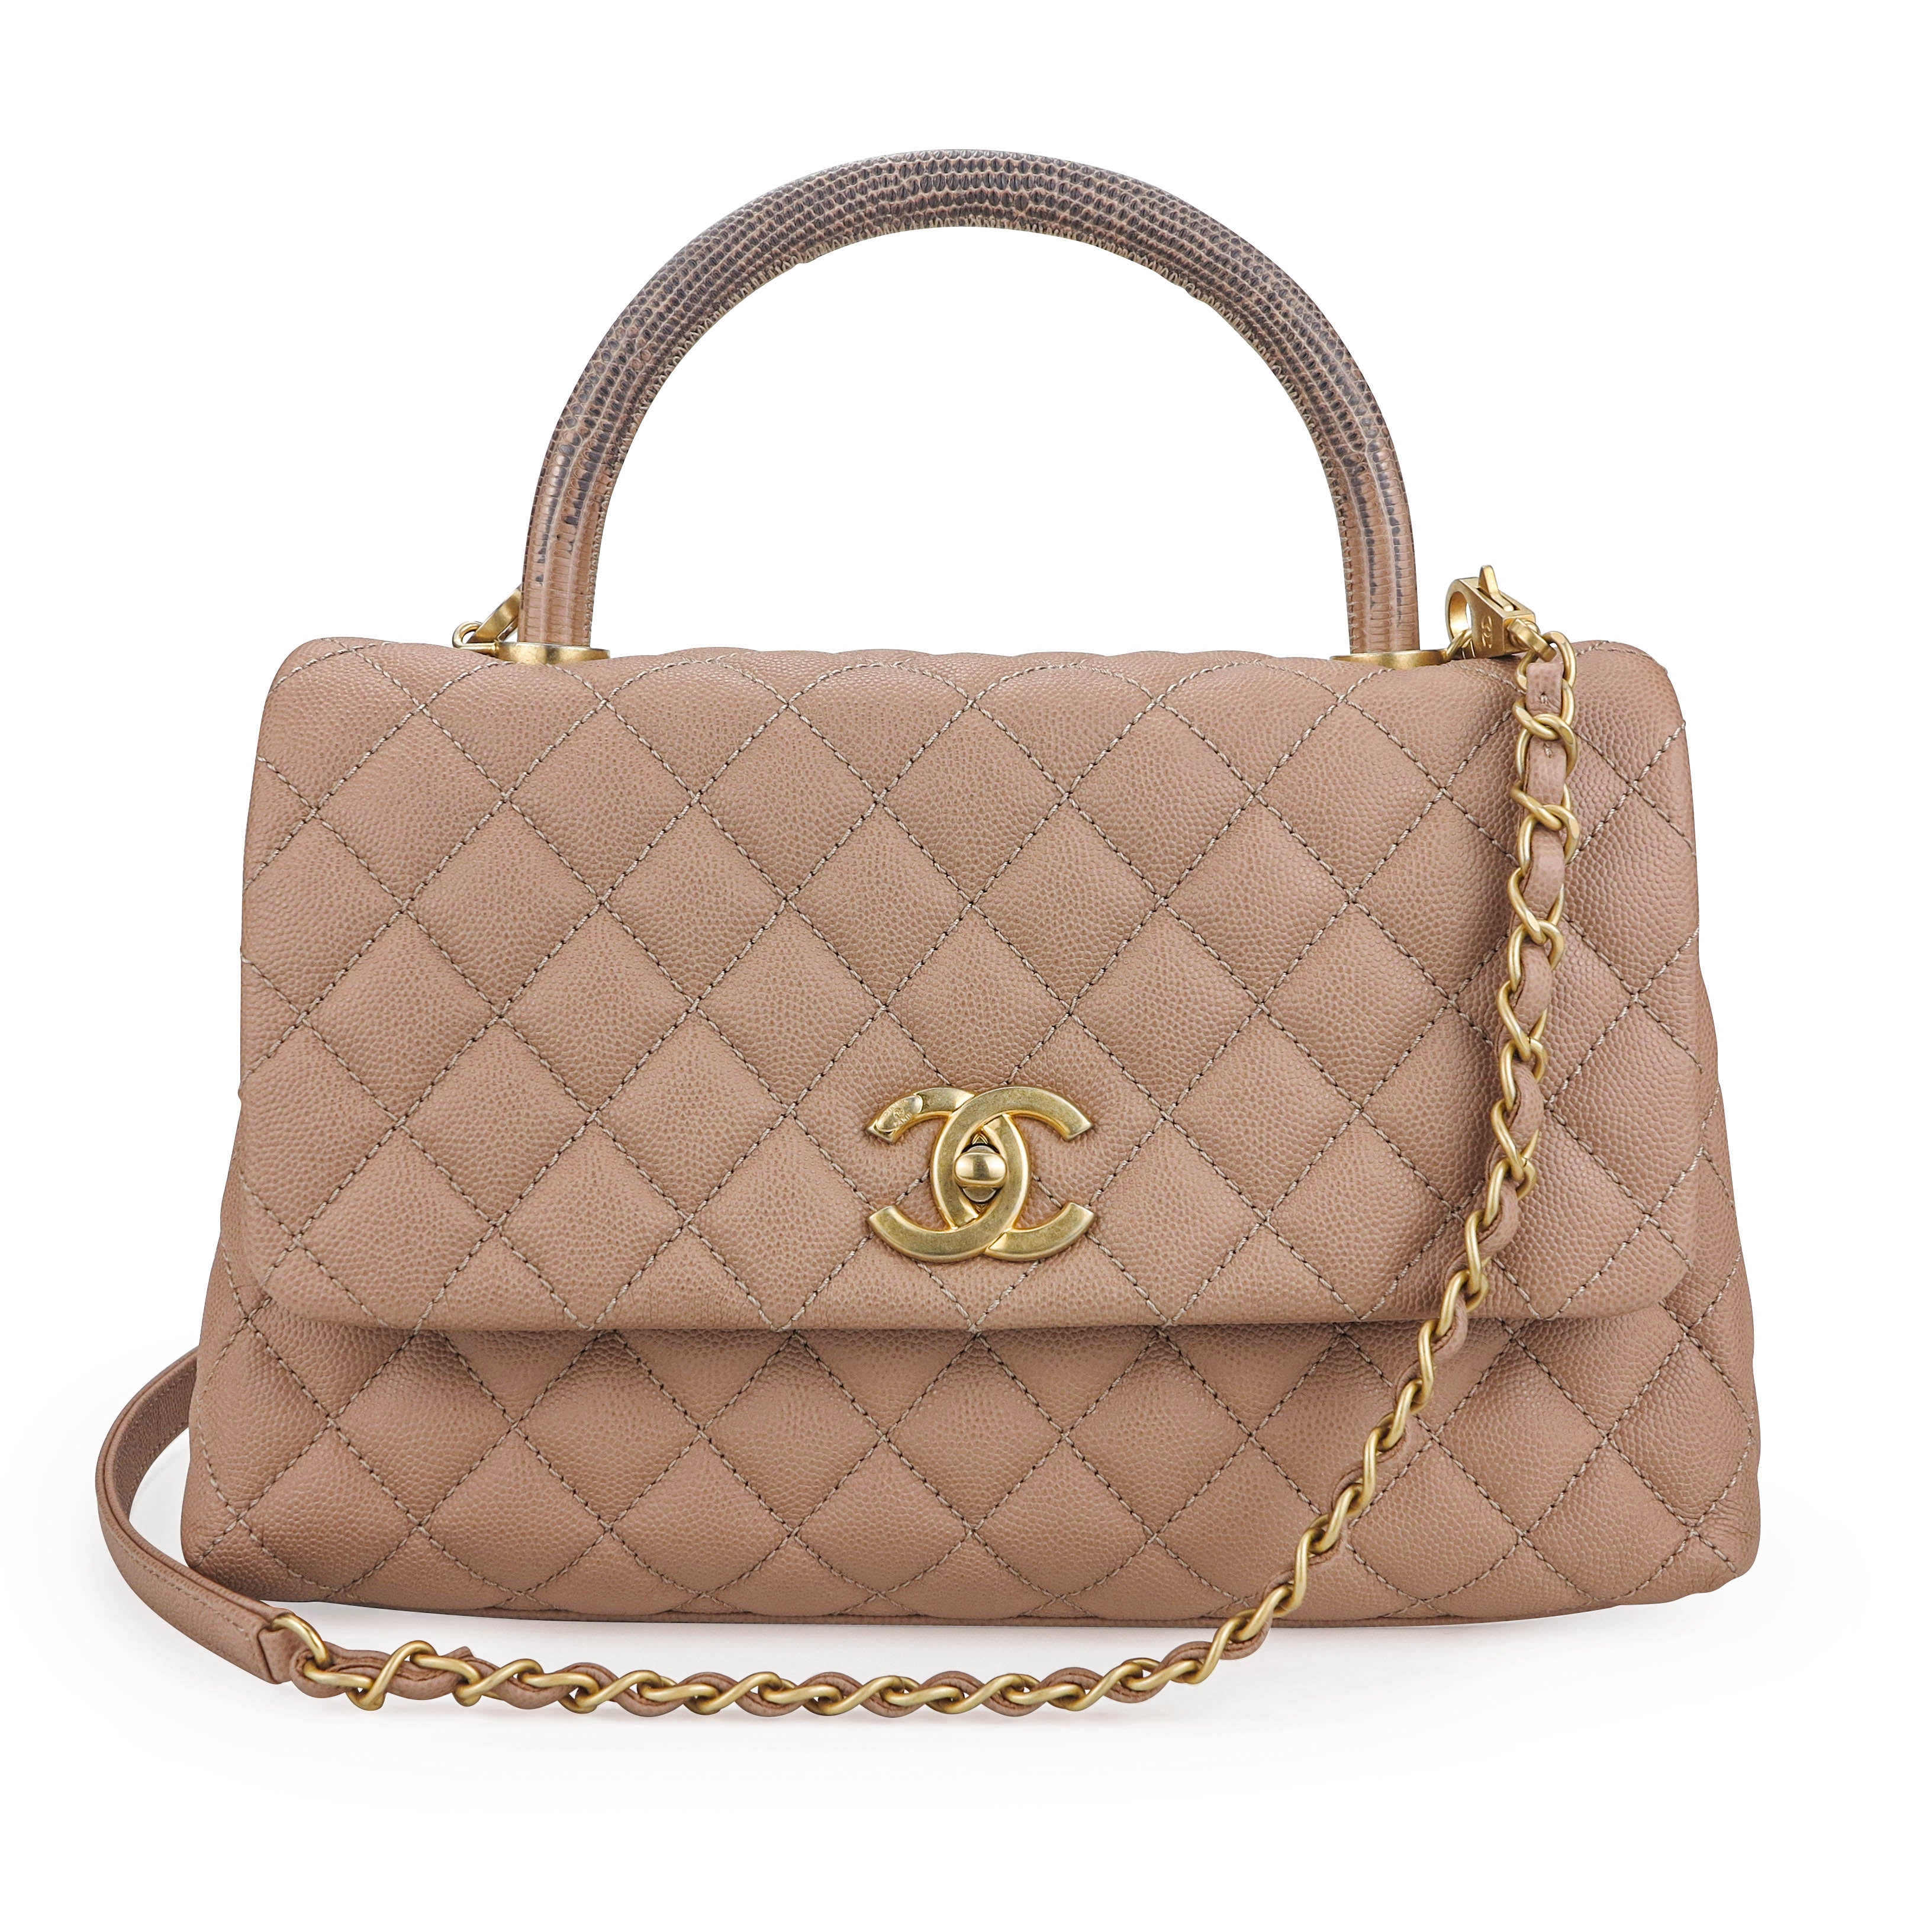 CHANEL Small Coco Handle Bag with Lizard Handle in Beige Caviar